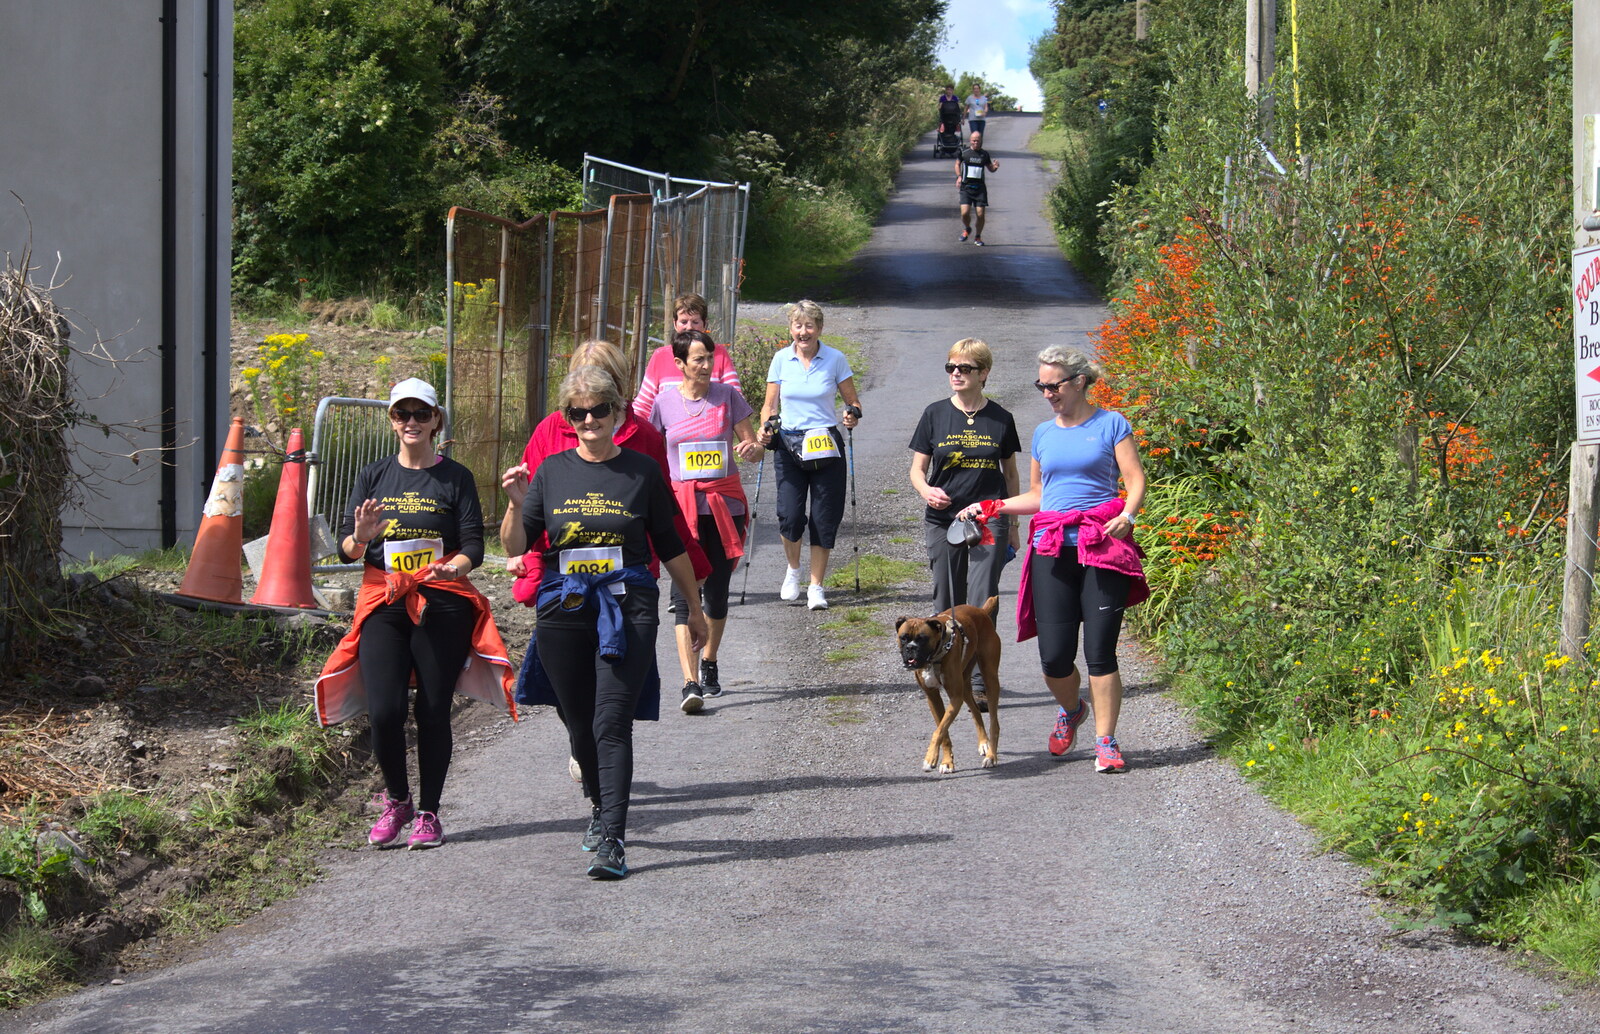 Walkers and people with dogs head down to the finish from The Annascaul 10k Run, Abha na Scáil, Kerry, Ireland - 5th August 2017